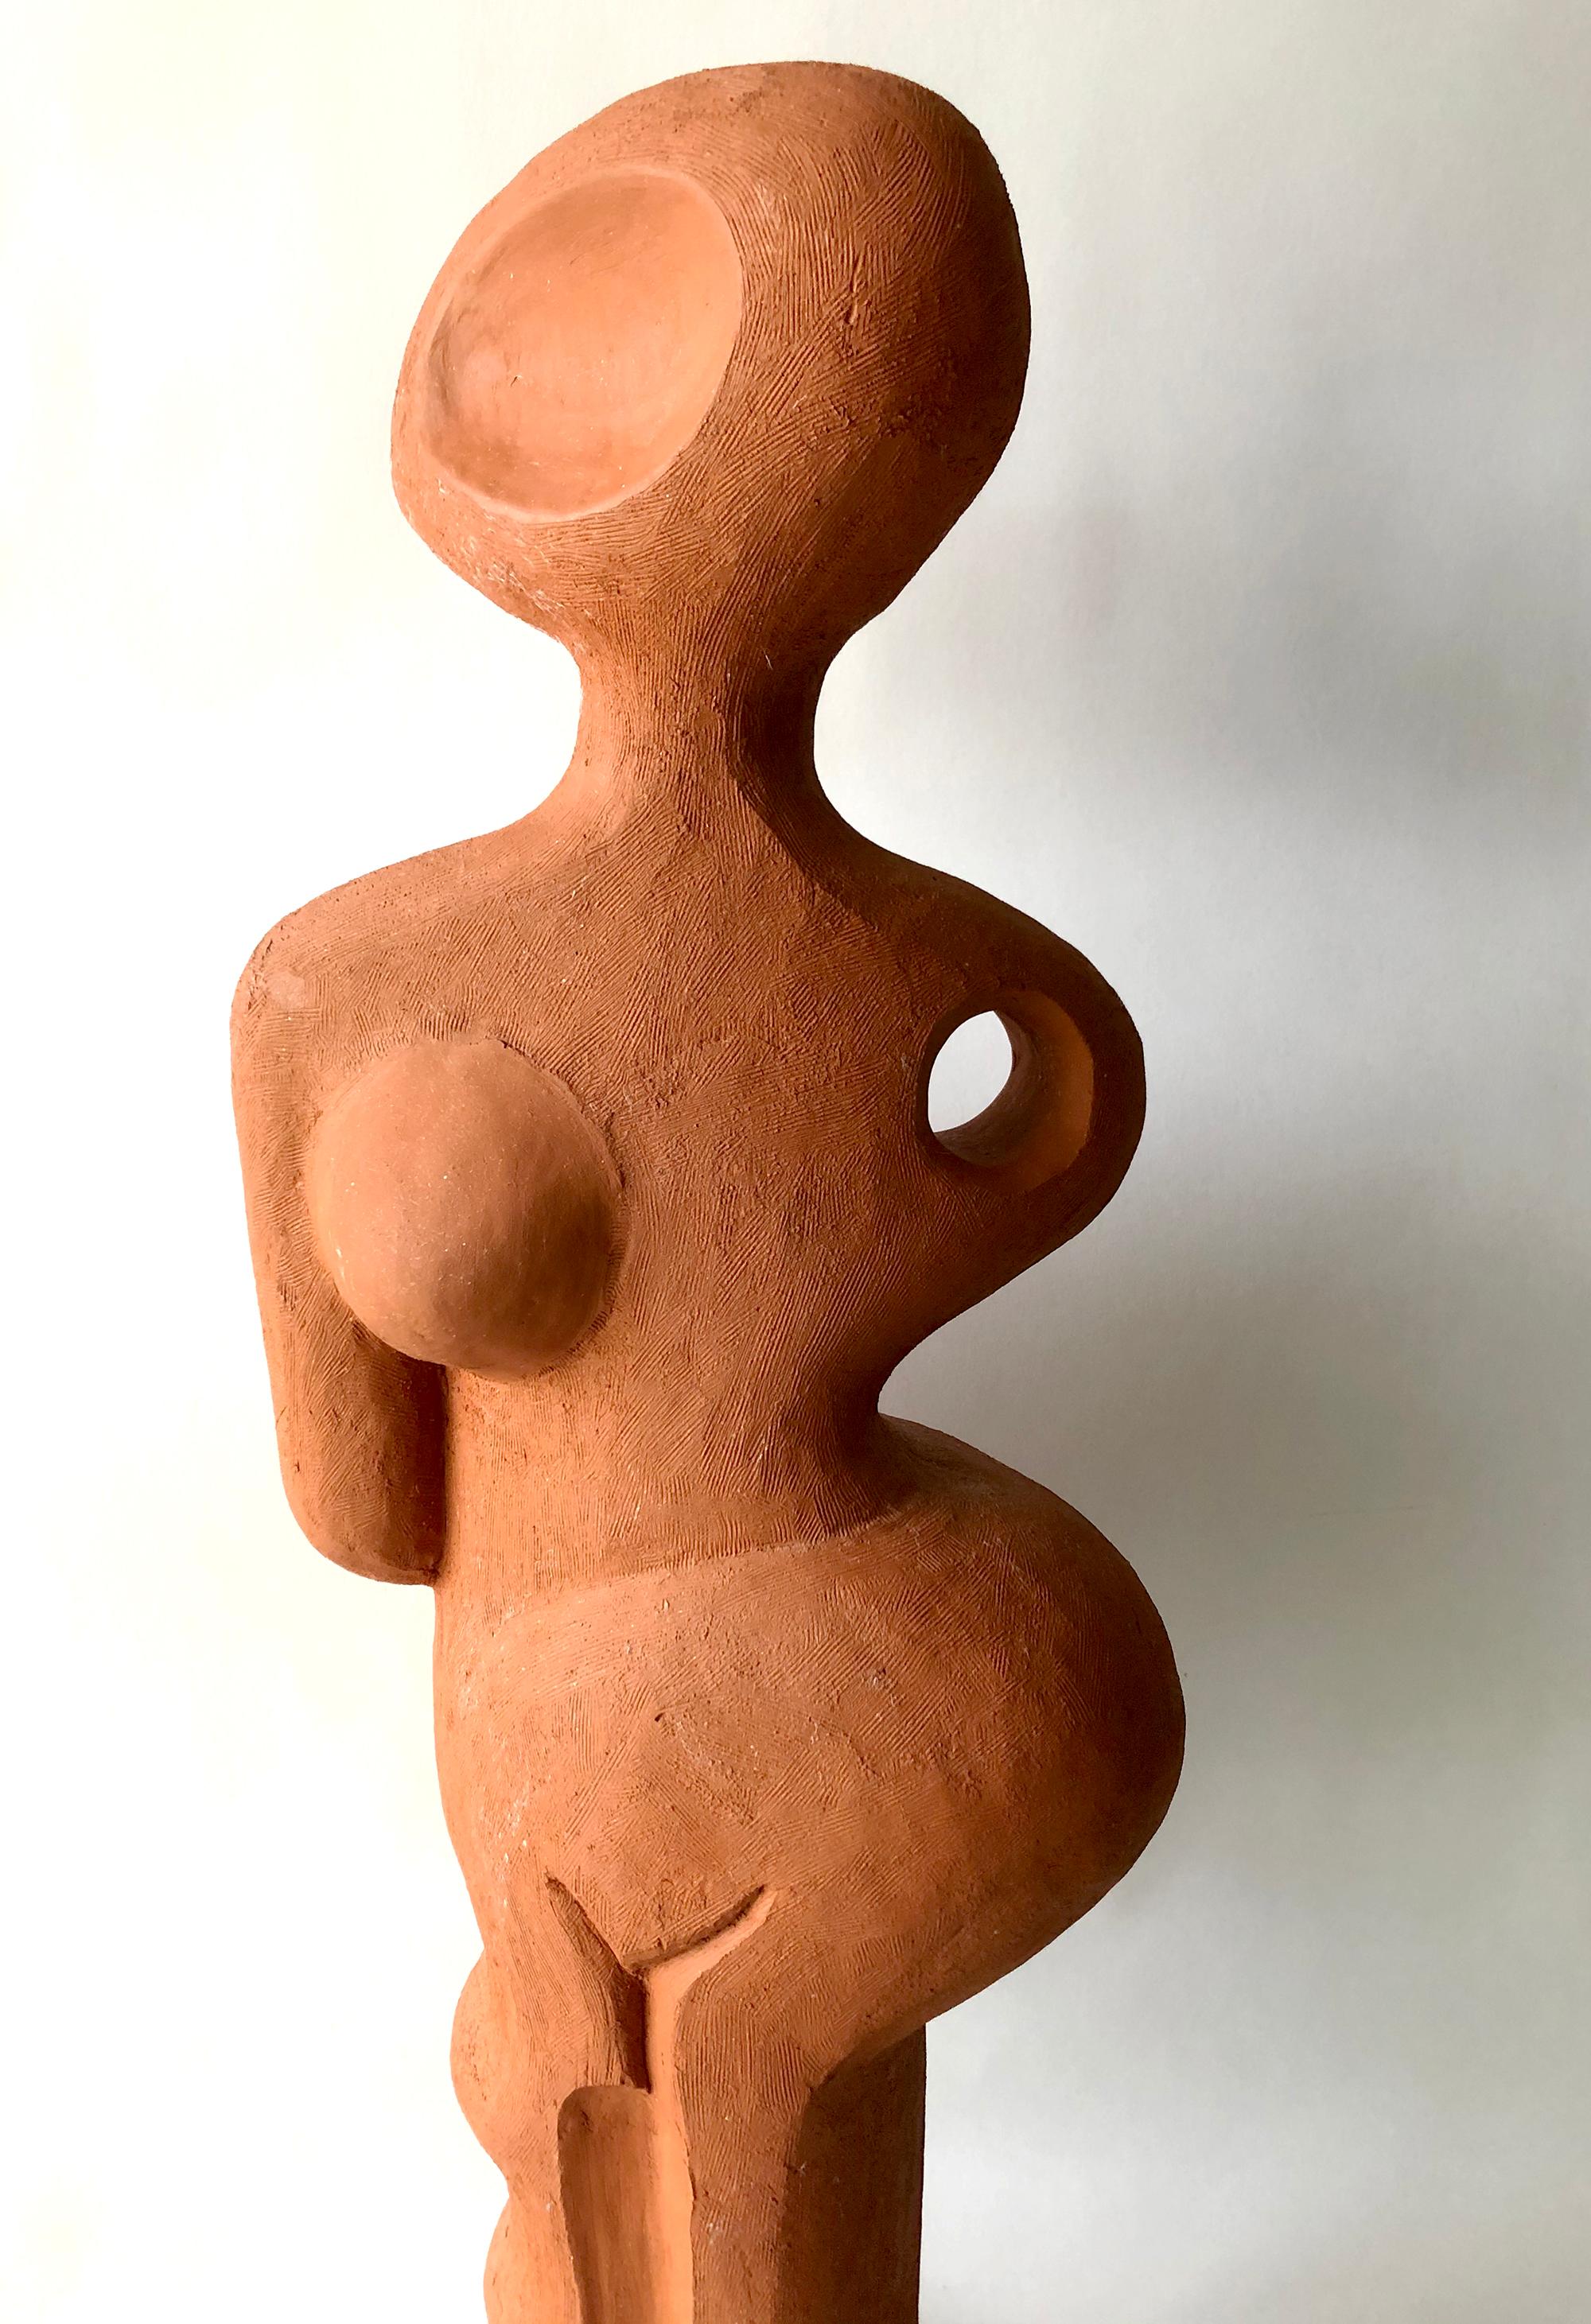 Terracotta midcentury abstract female figure sculpture entitled Shirley by Jack Mason of Stone Mountain, Georgia. Sculpture measures 28